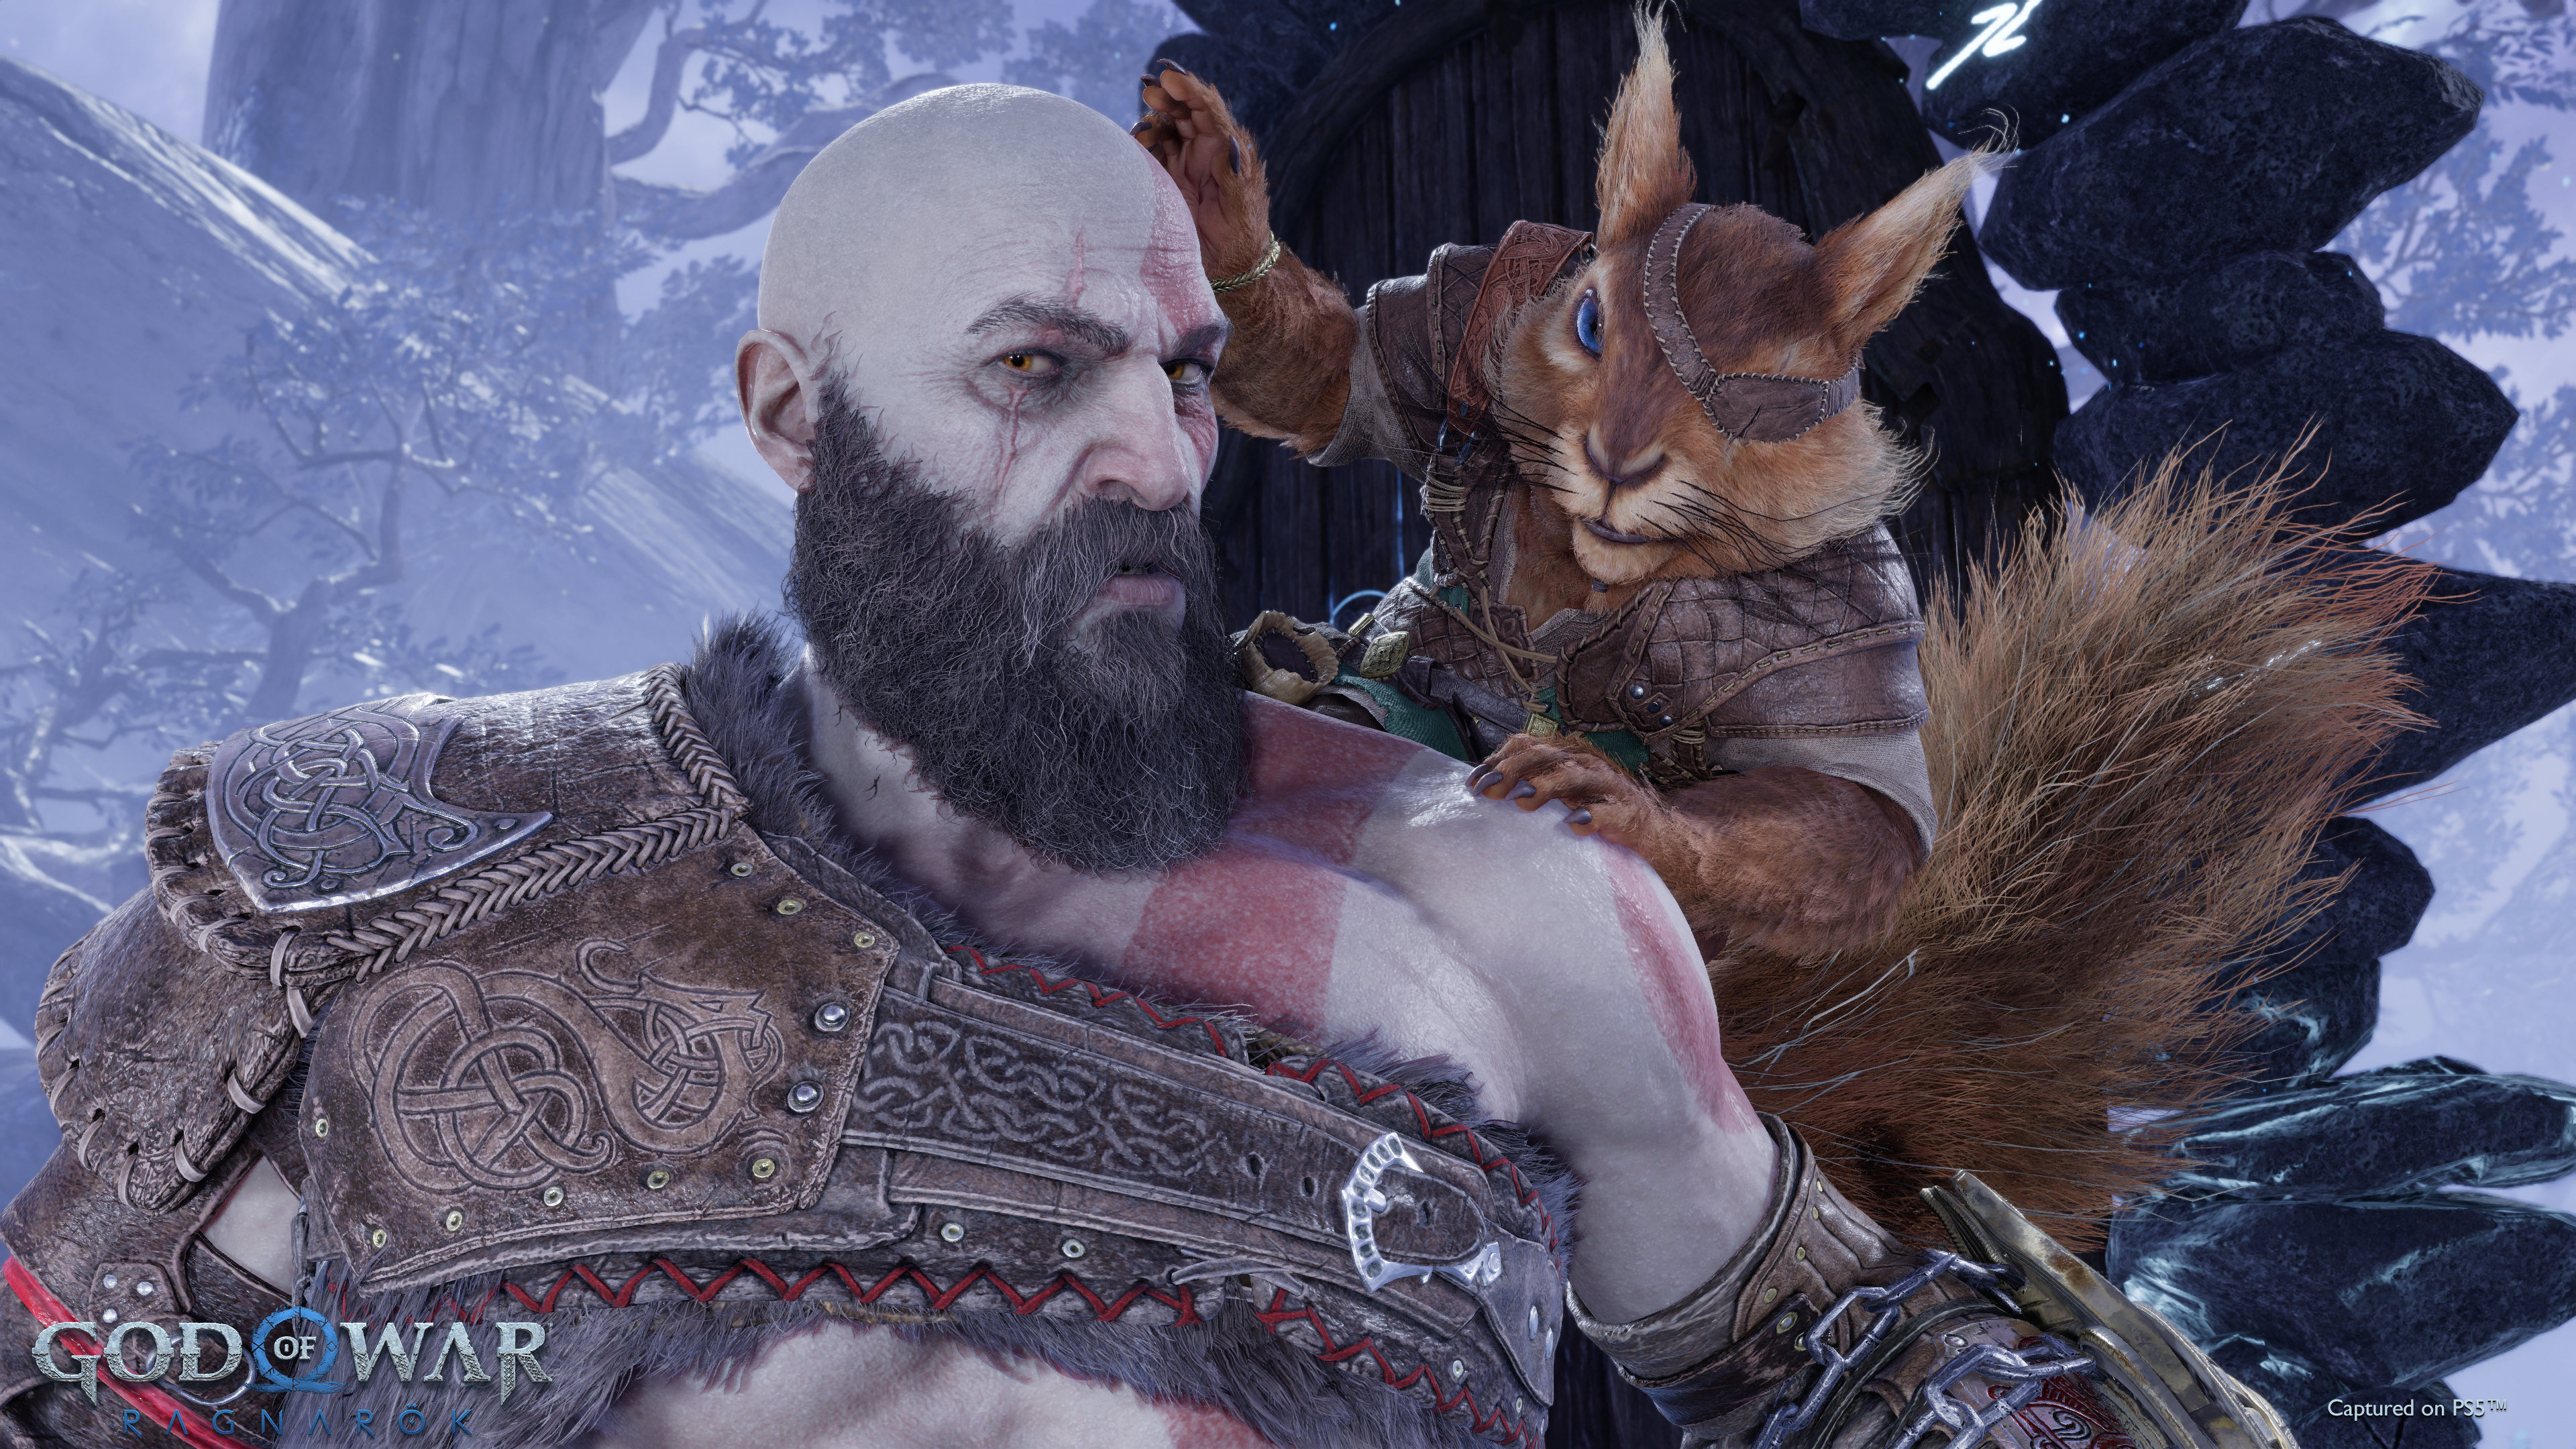 God of War Ragnarok review: Unmatched spectacle action that’s determined to say the quiet part loud